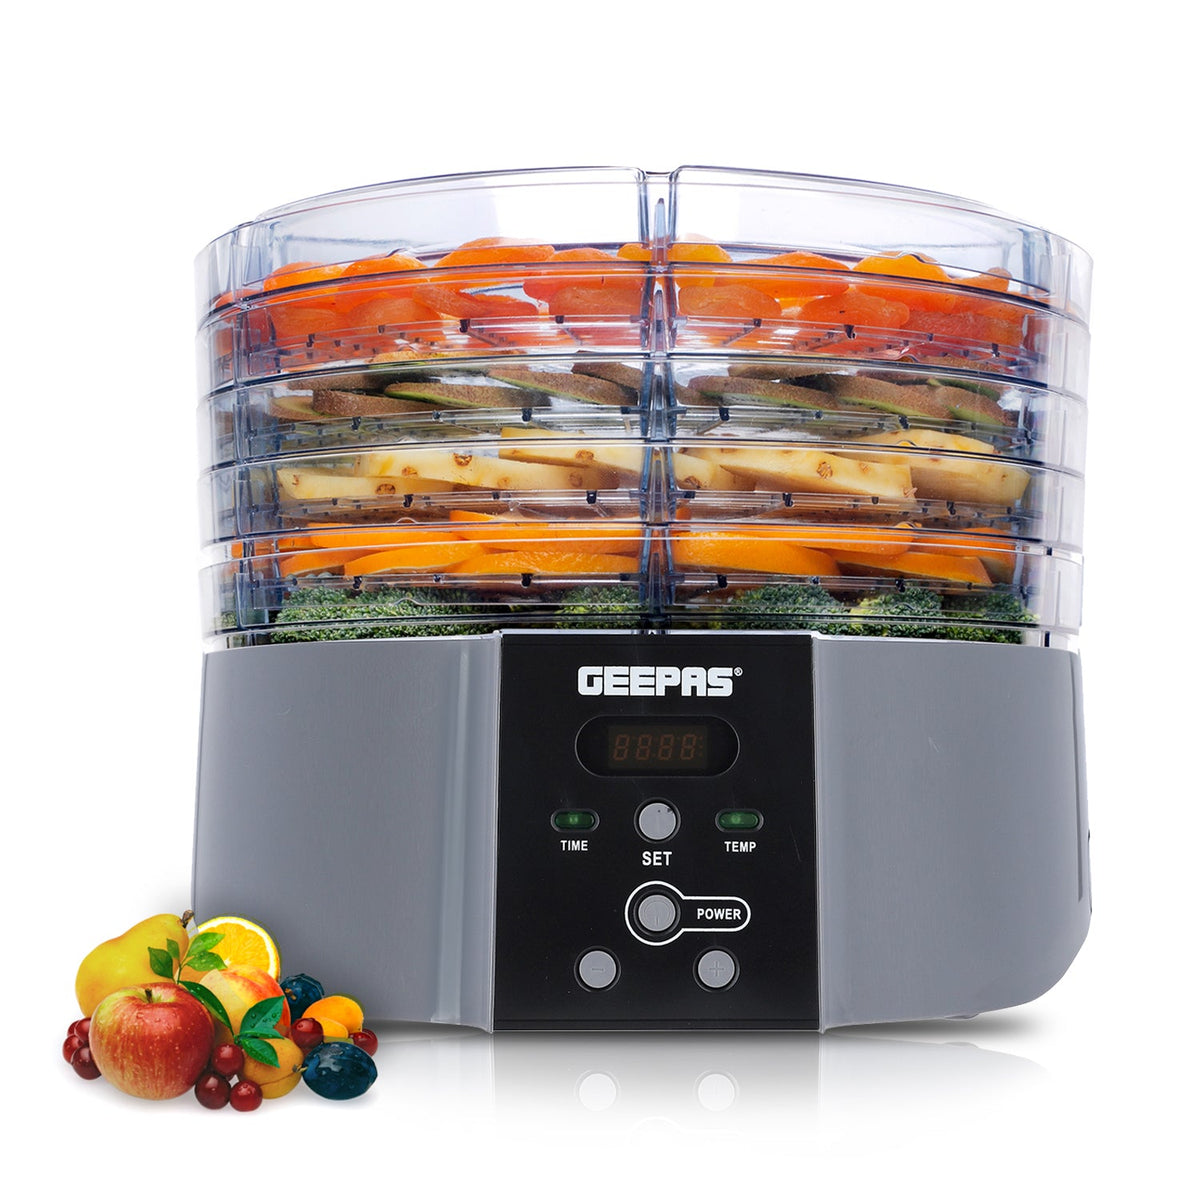 Digital Electric 5 Tier Food Dehydrator Geepas | For you. For life. 